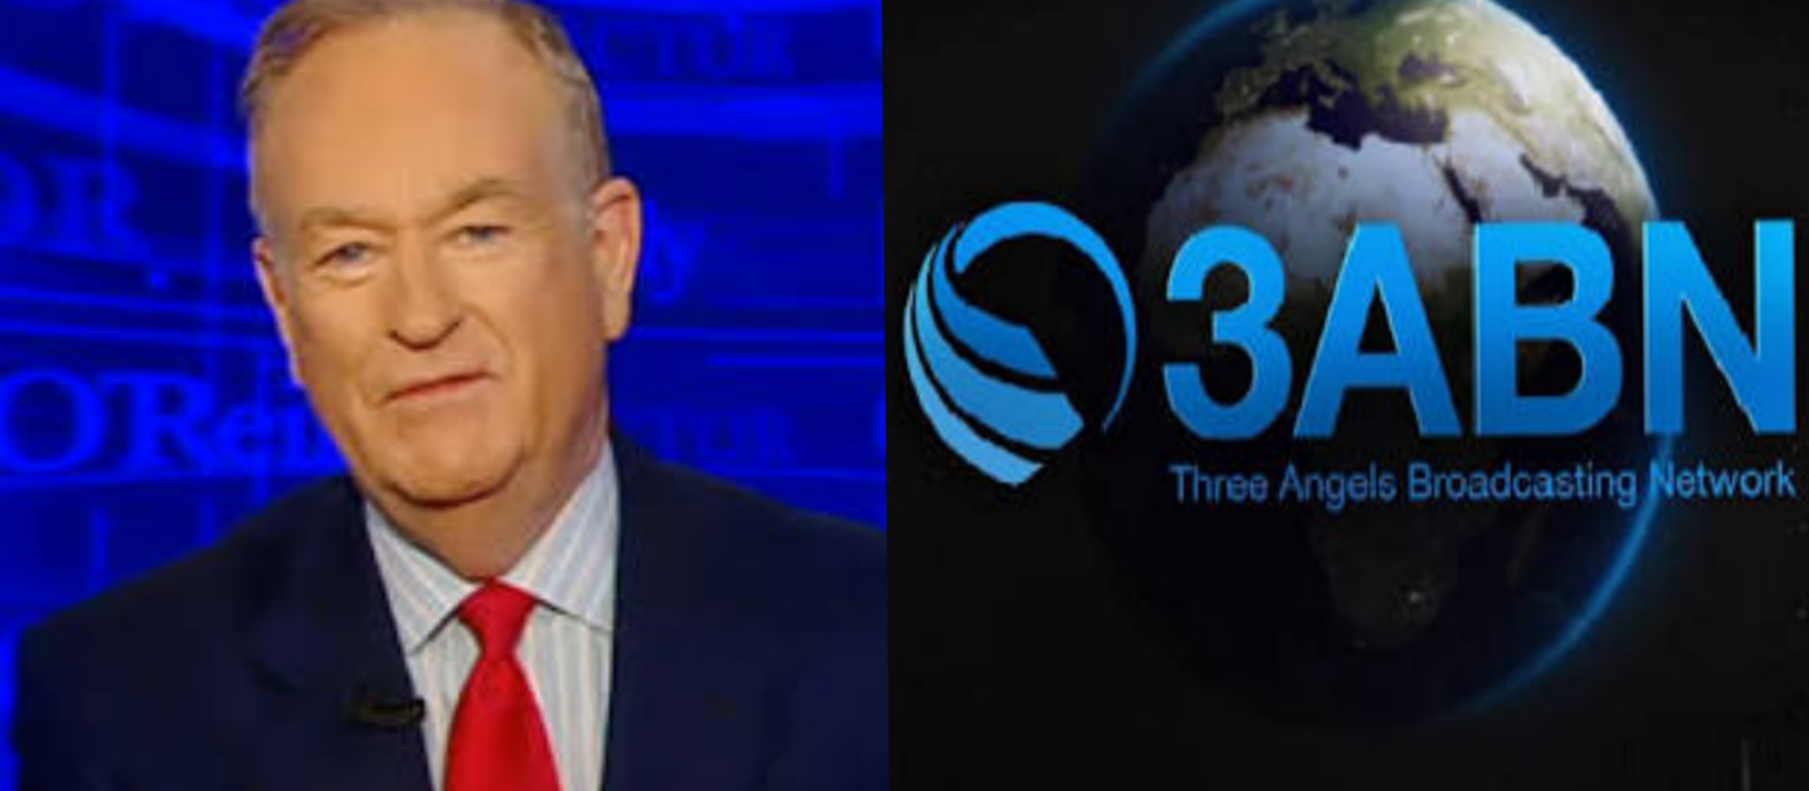 3ABN to feature on Fox News after Bill O’Reilly departure